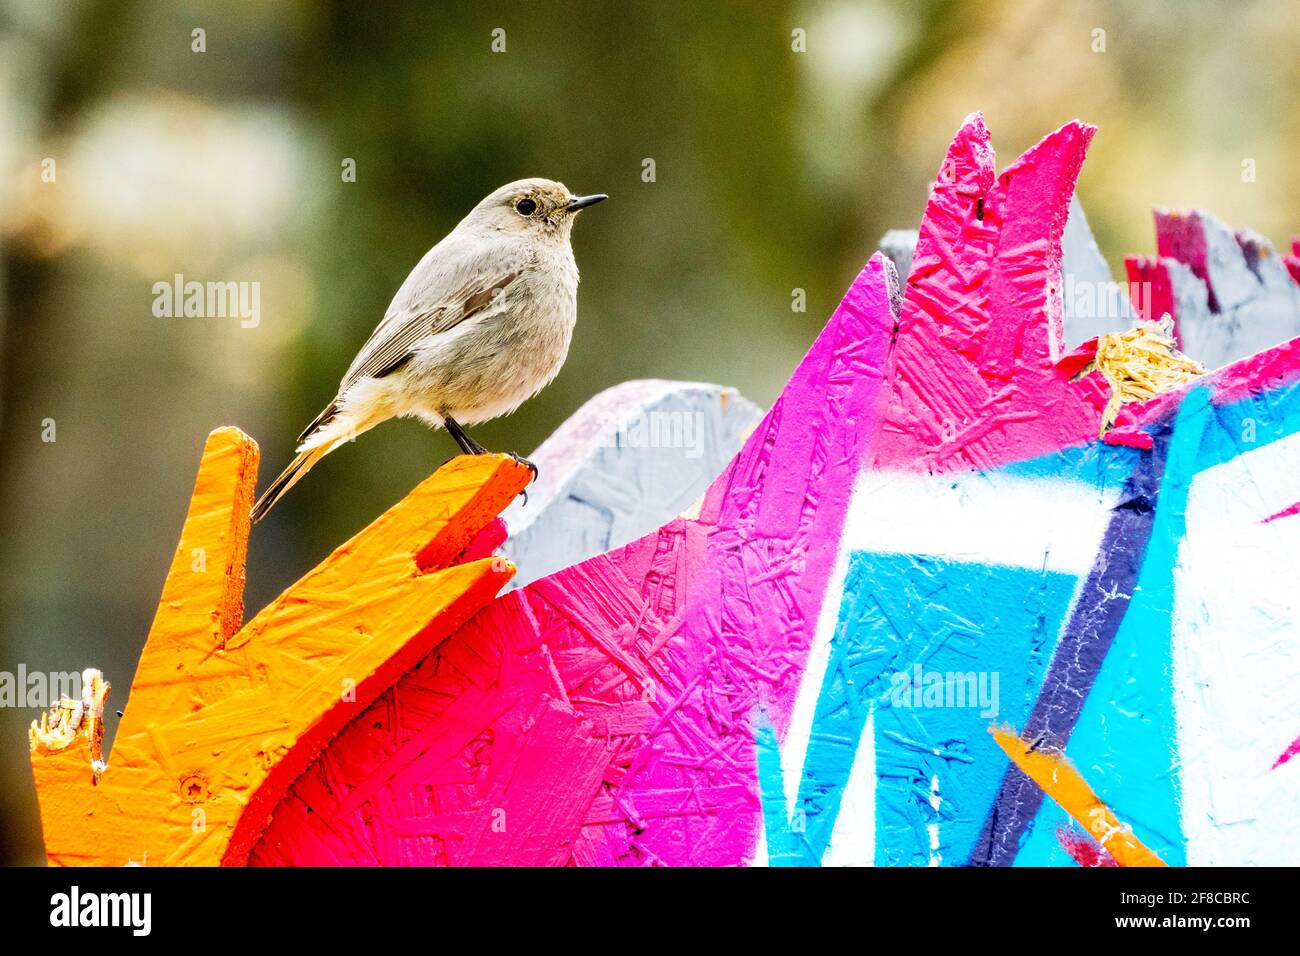 Common Redstart Phoenicurus phoenicurus Female Redstart City Bird Urban Bird Urban Animals Female Bird Perched on Colorful Fence City Animal Colourful Stock Photo